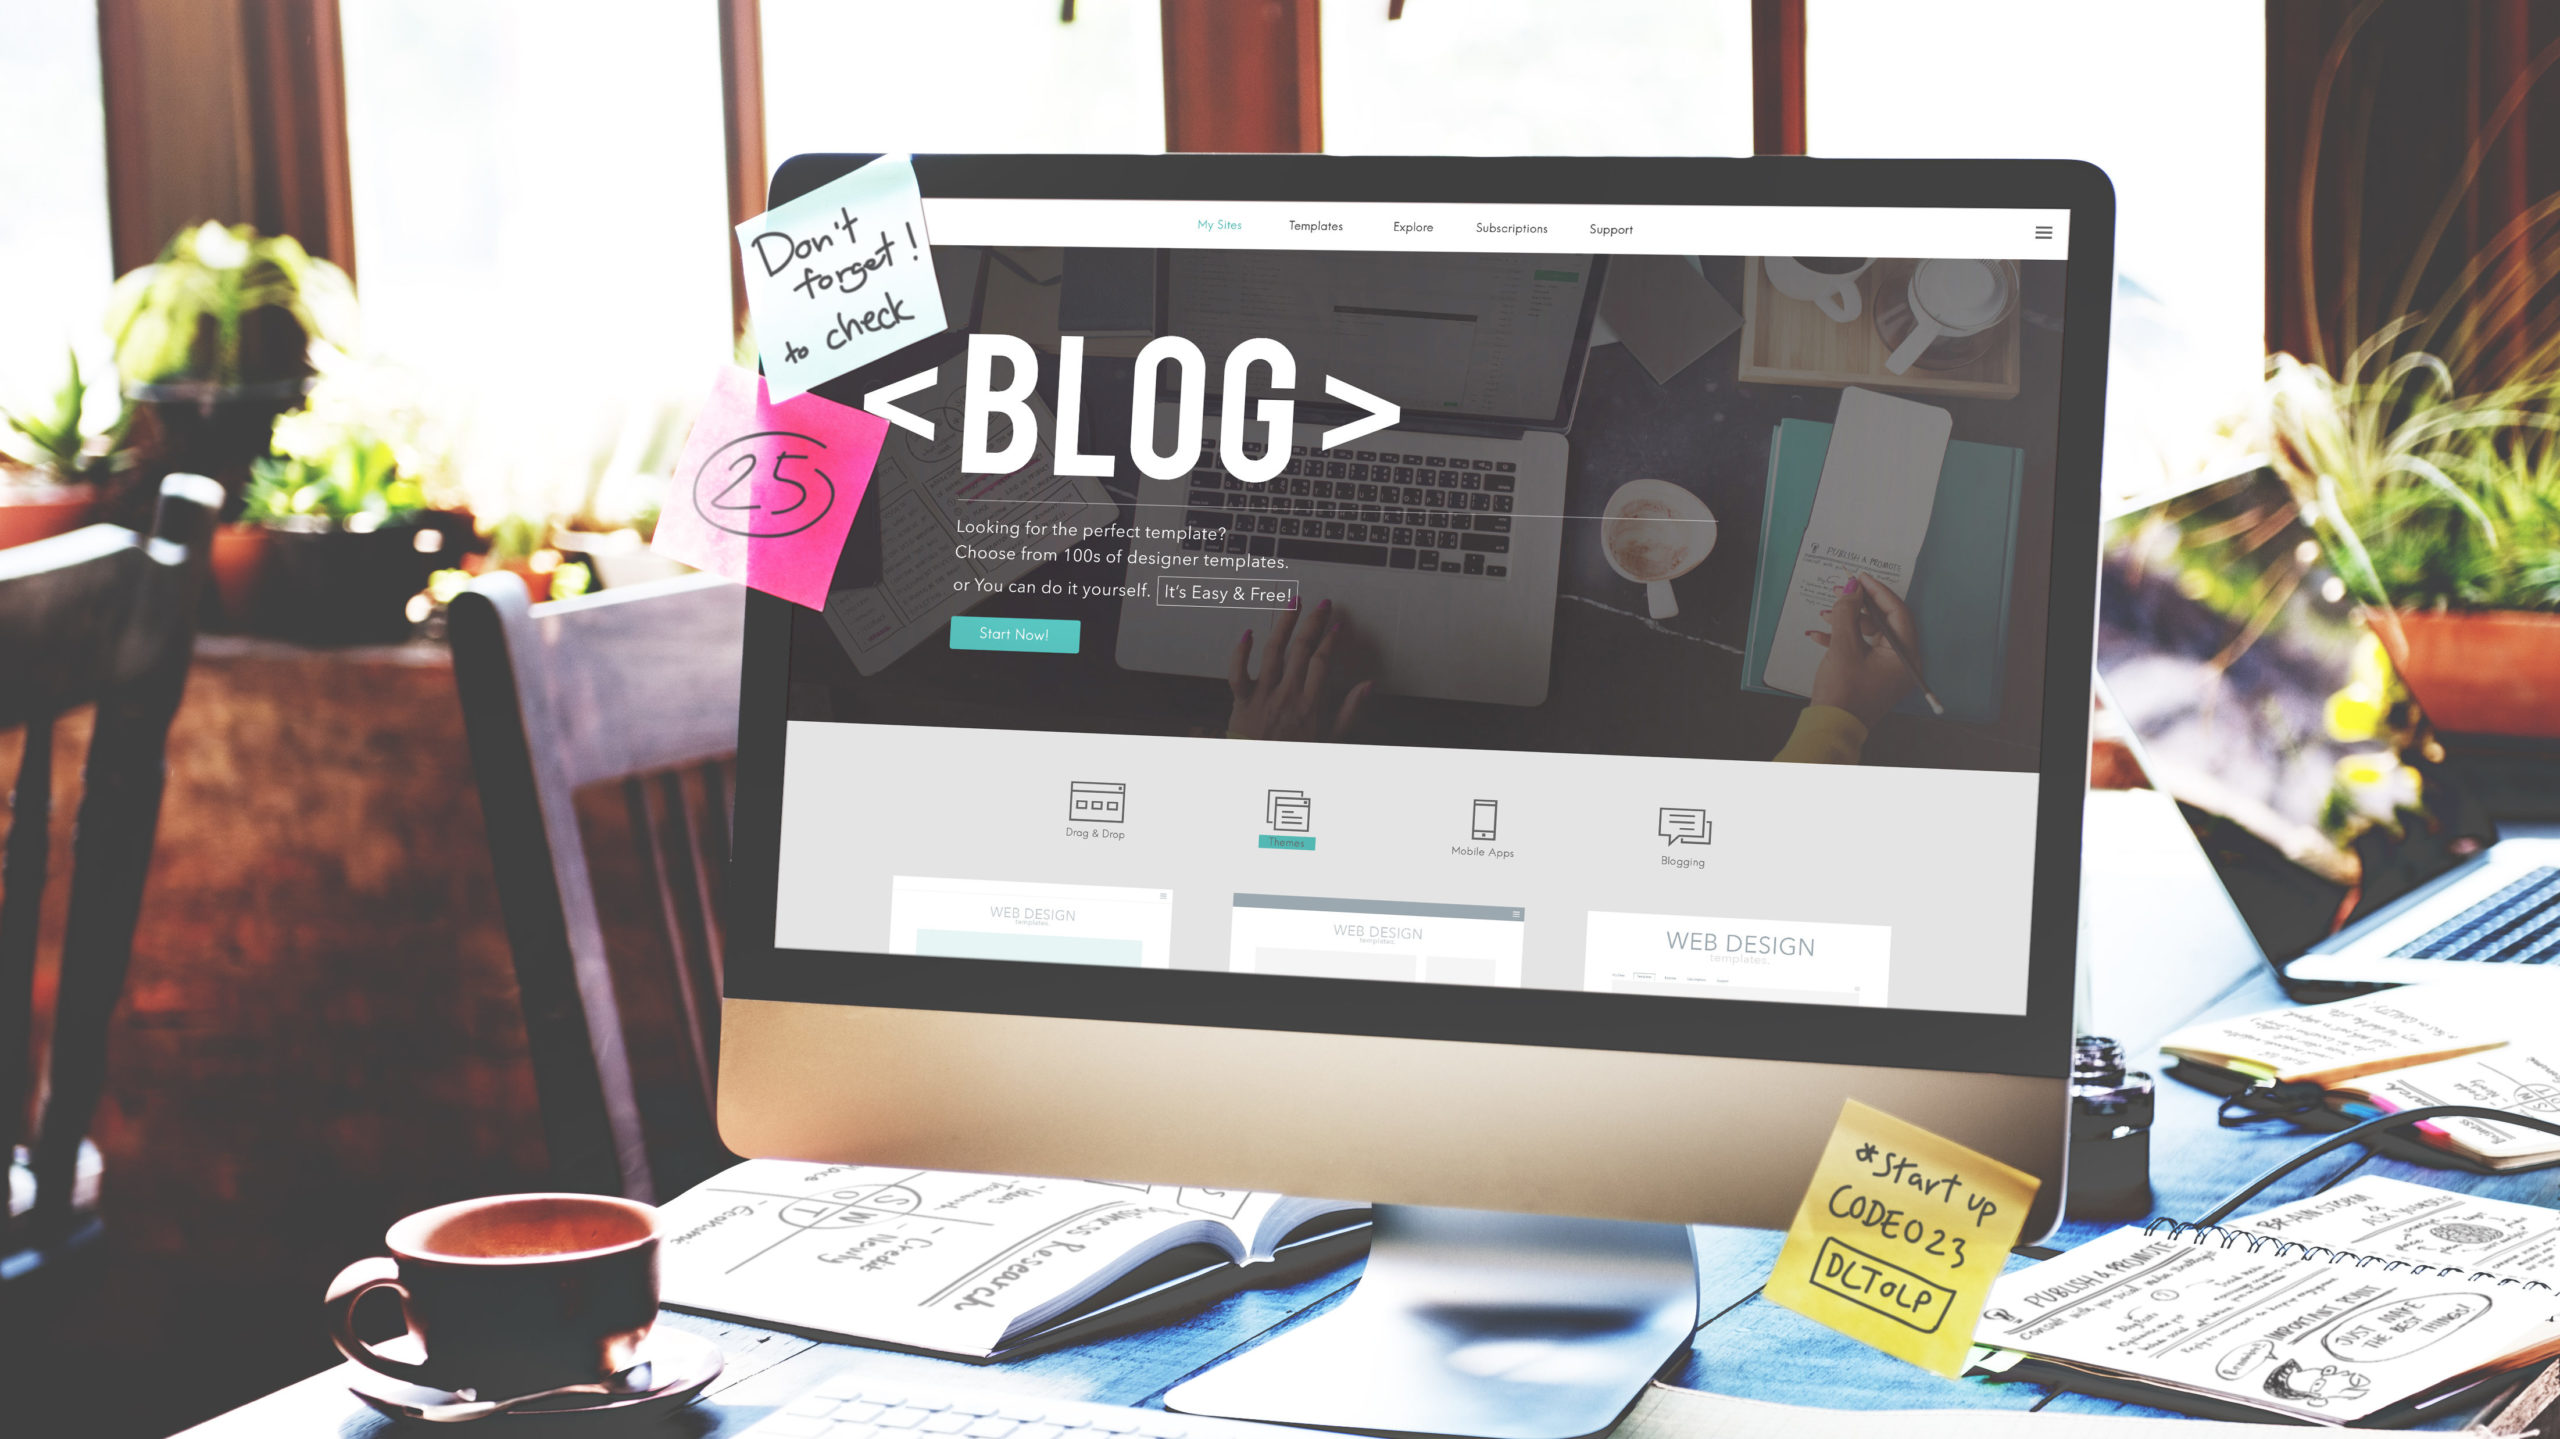 Add content to blog